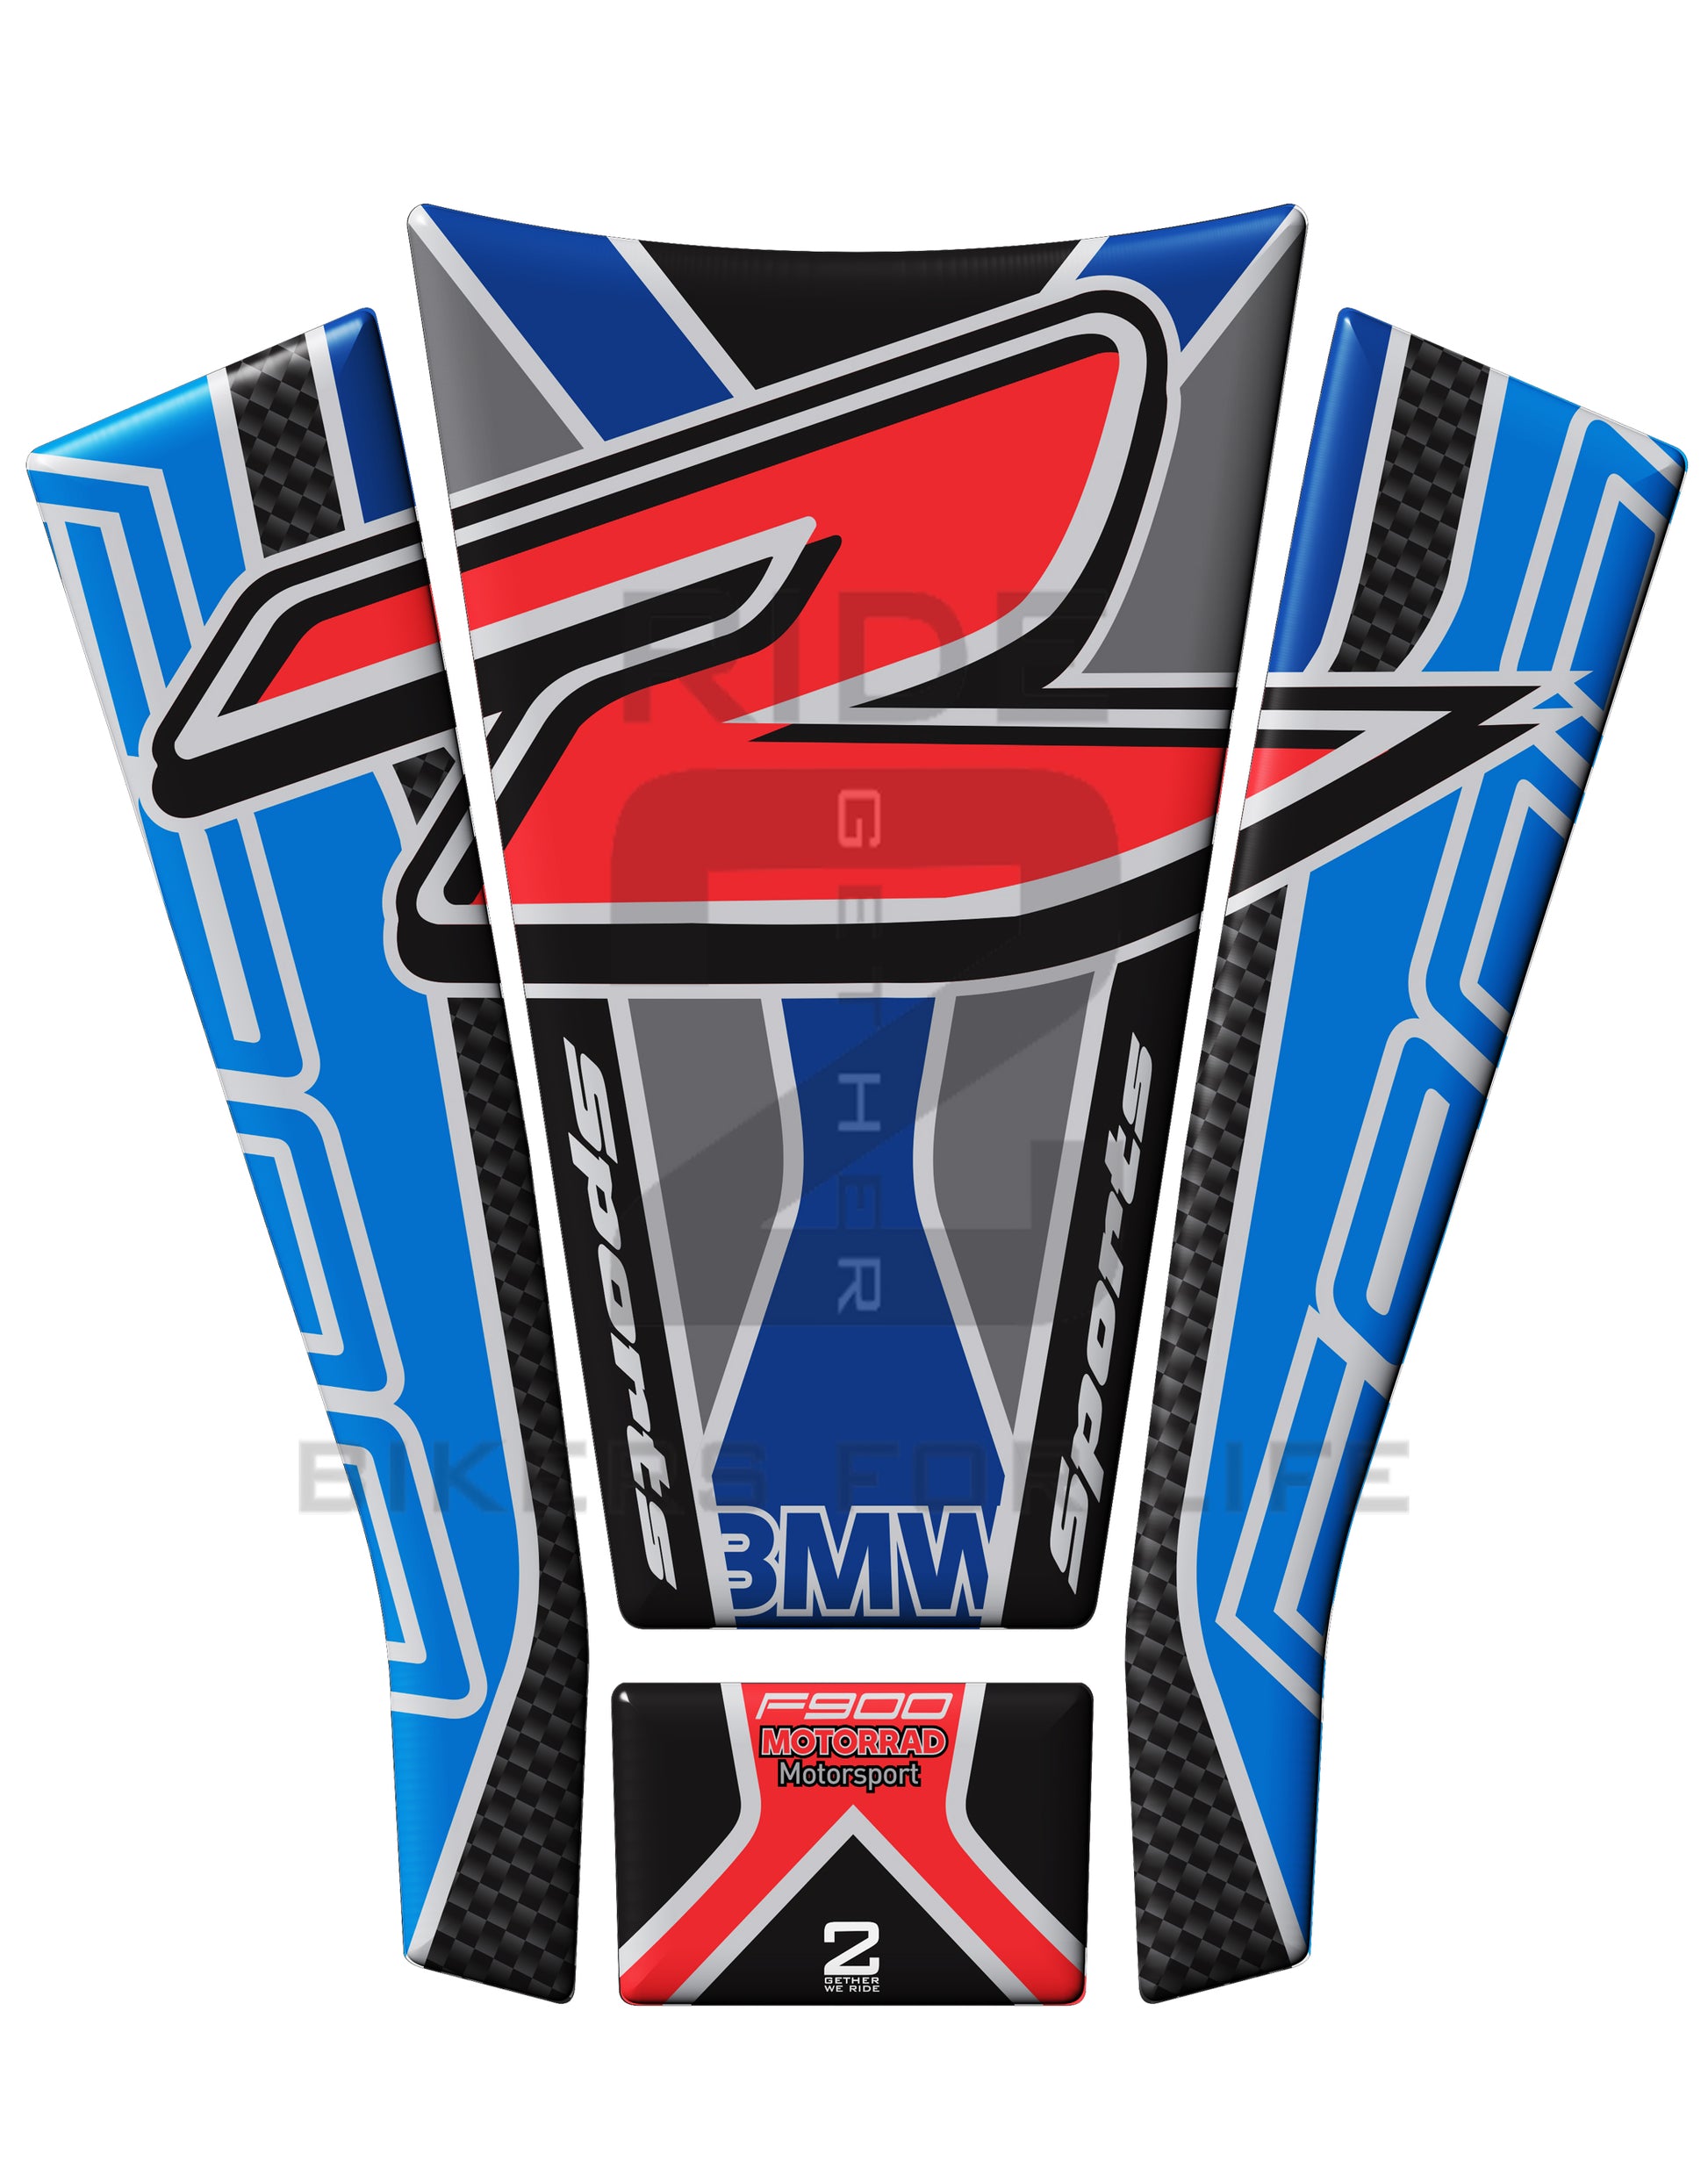 BMW F900 R Motor Bike Tank Pad / Protector 2020 - 2021. Blue ,White Red, Black Carbon Fire